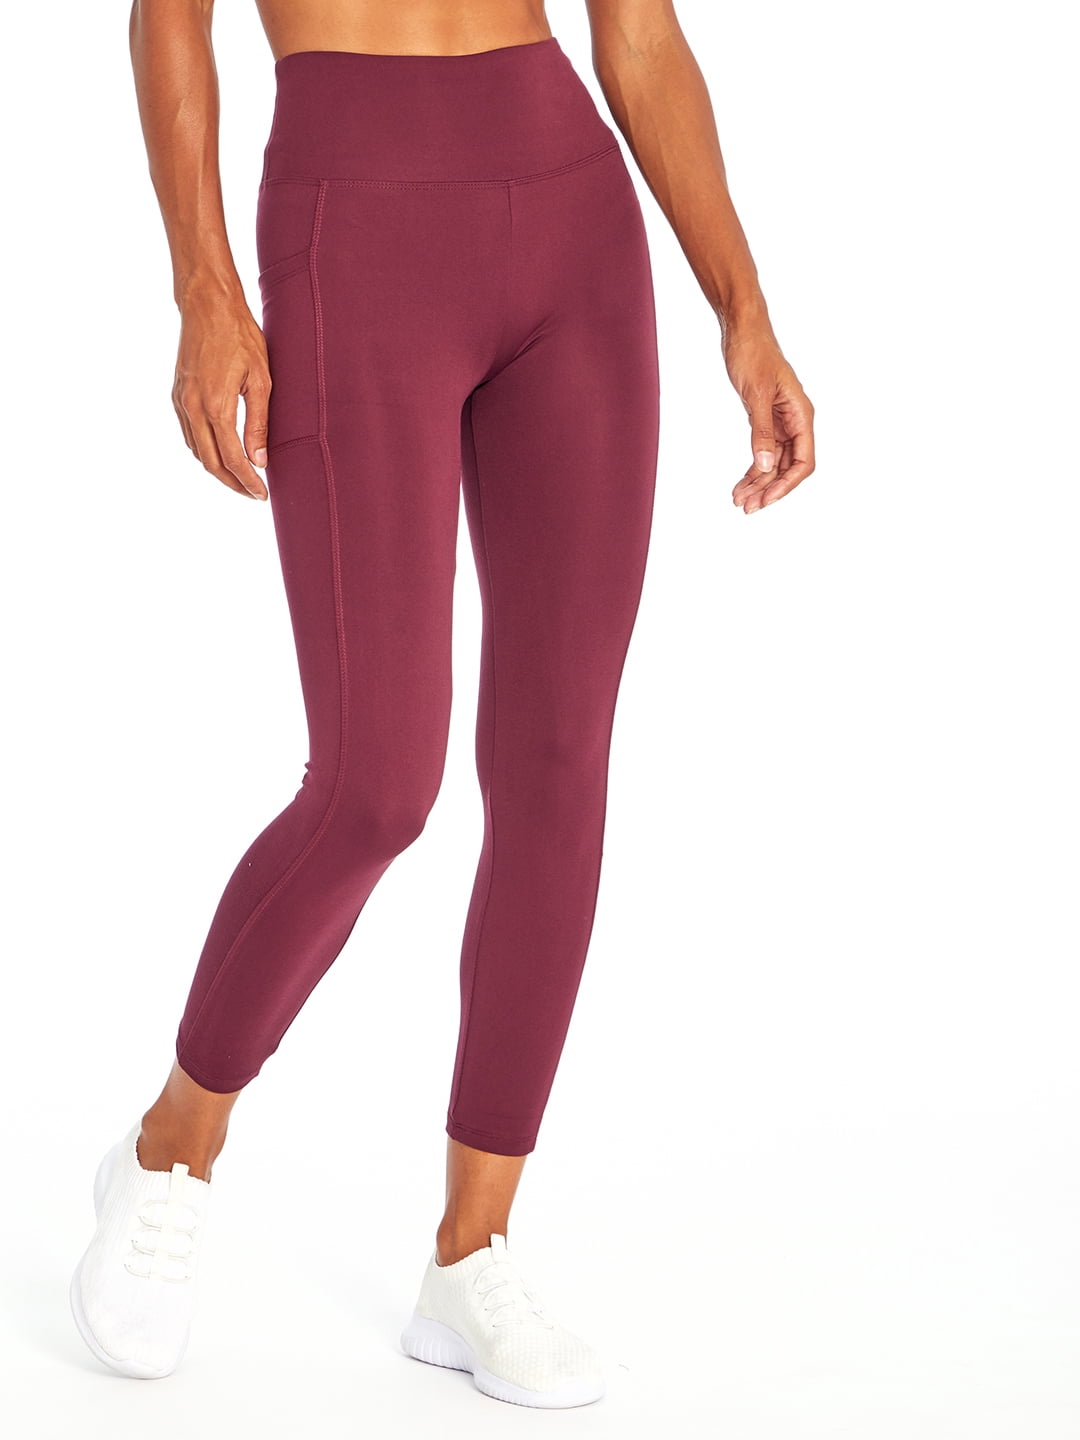 Bally Total Fitness Active Momentum Leggings | Walmart's Workout Clothes  Are Next-Level Cute and Seriously Affordable | POPSUGAR Fitness UK Photo 23